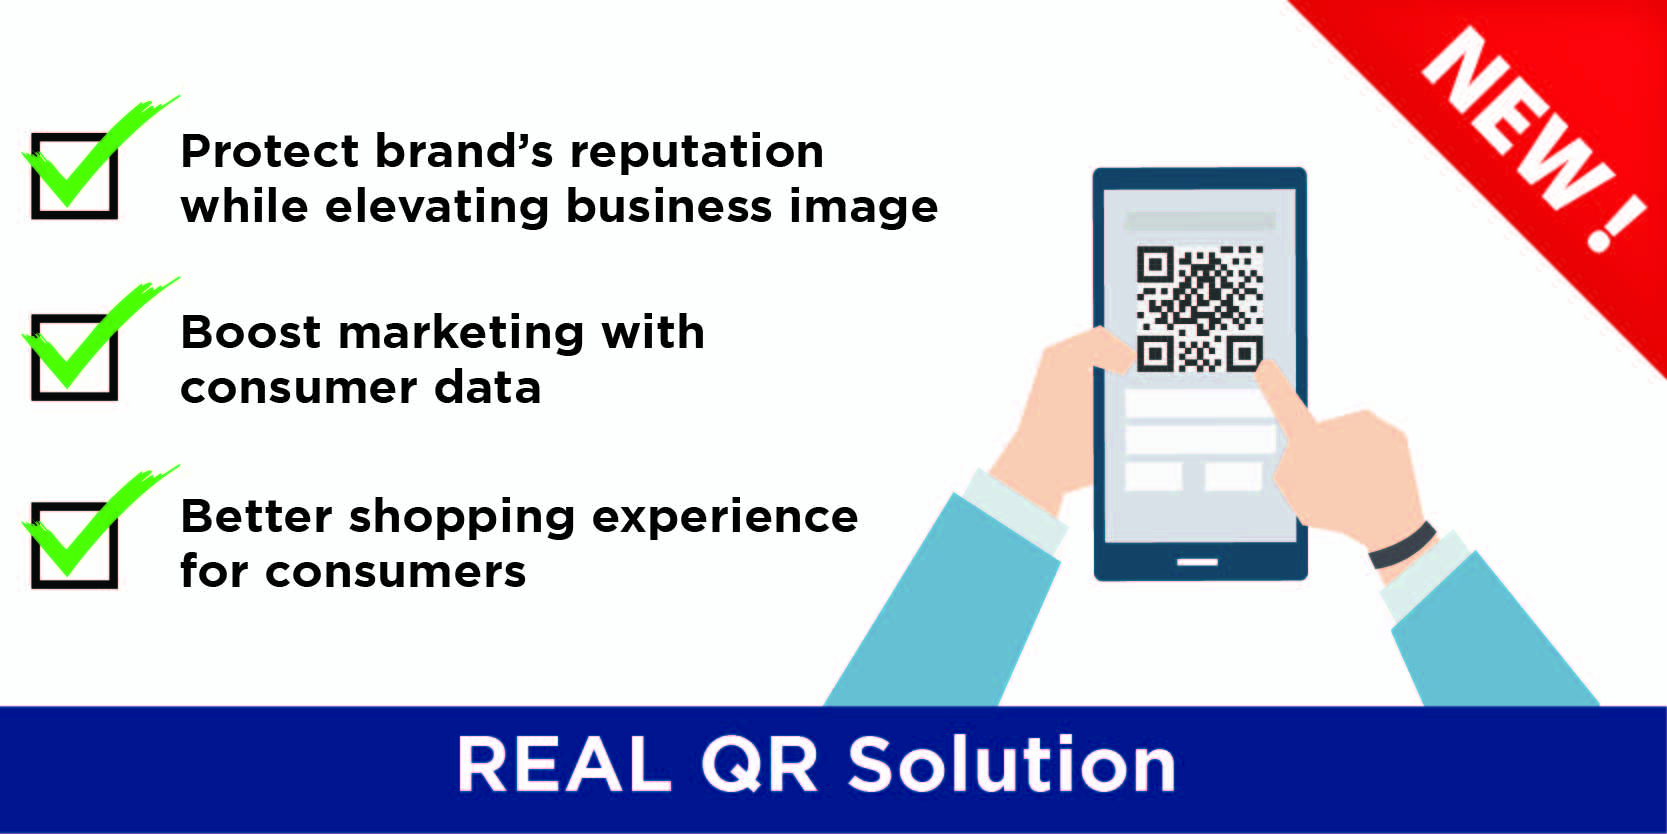 Real QR Solution